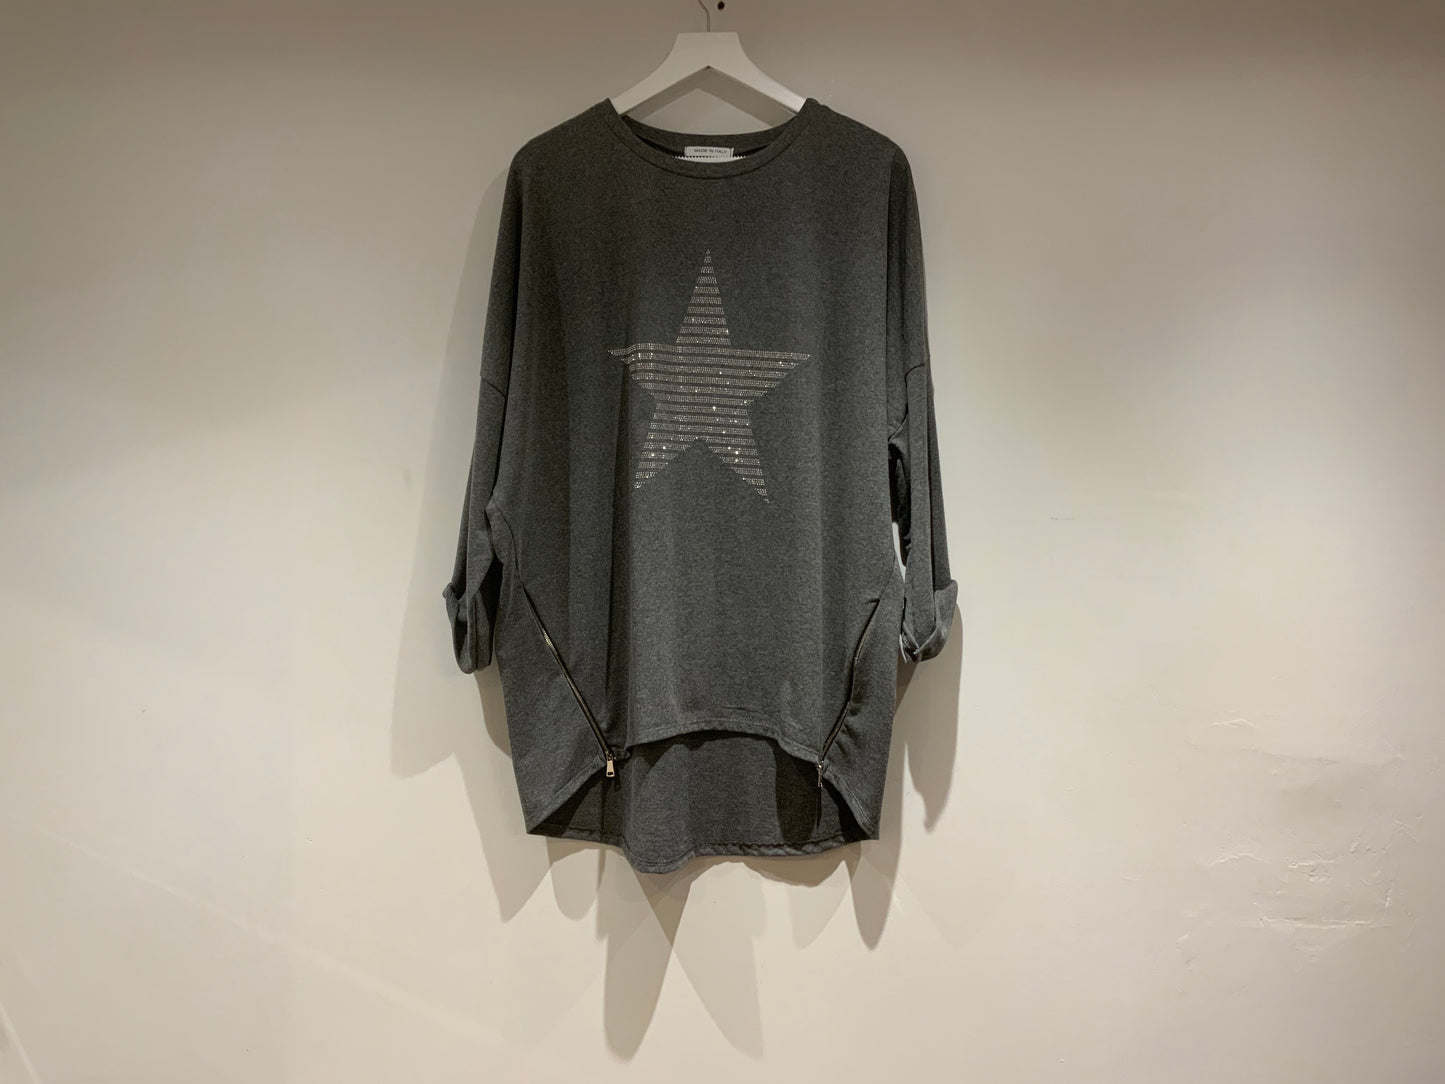 Made in Italy ‘Diamanté Star’ with side zip detail